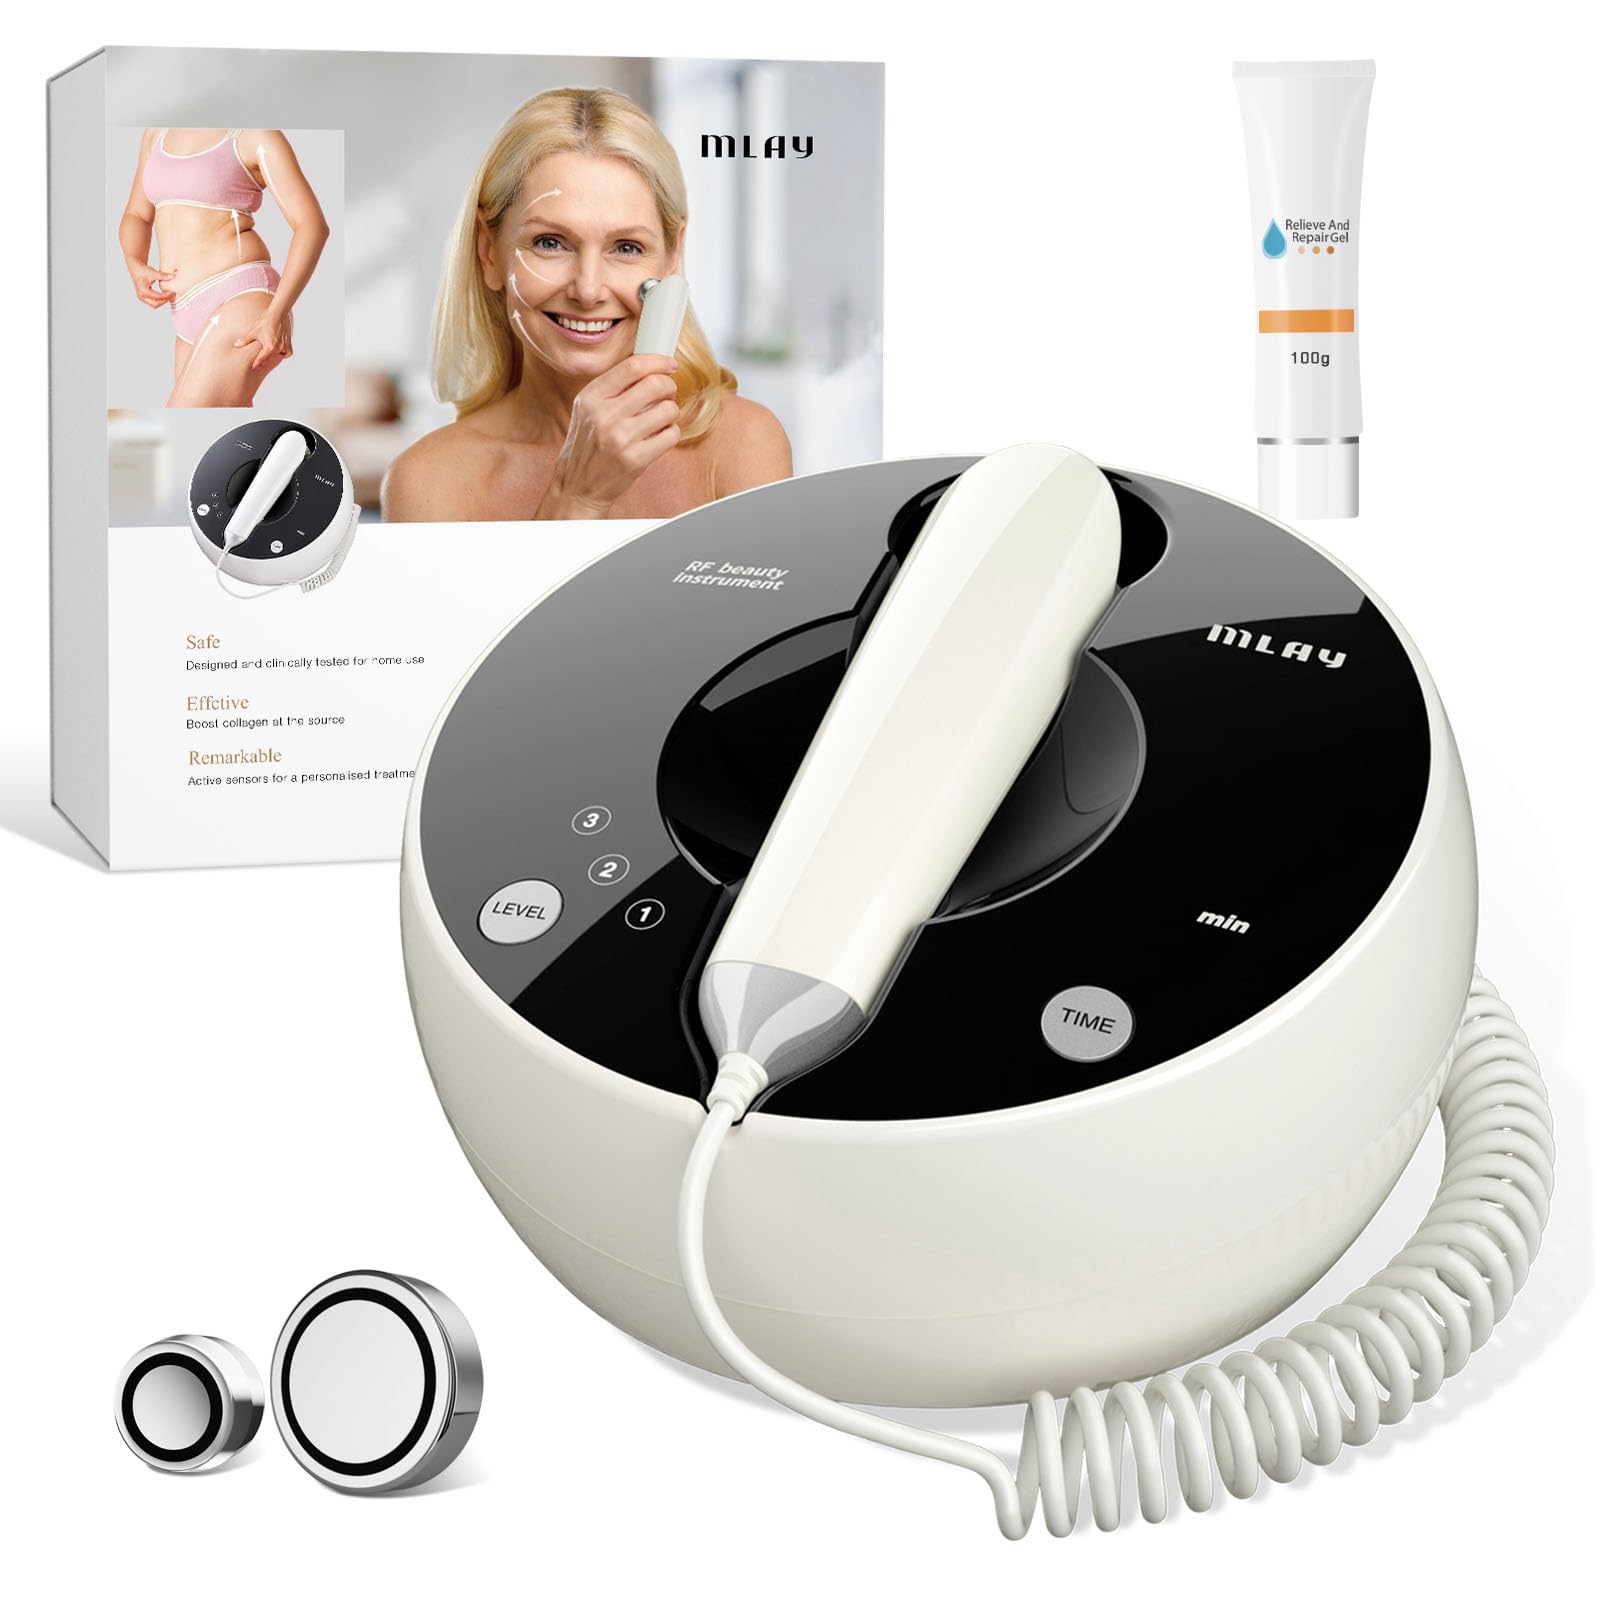 RF Beauty Device Home RF Lifting Wrinkle Removal Anti Aging Skin Care - Increase Collagen Absorption - MLAY Profess